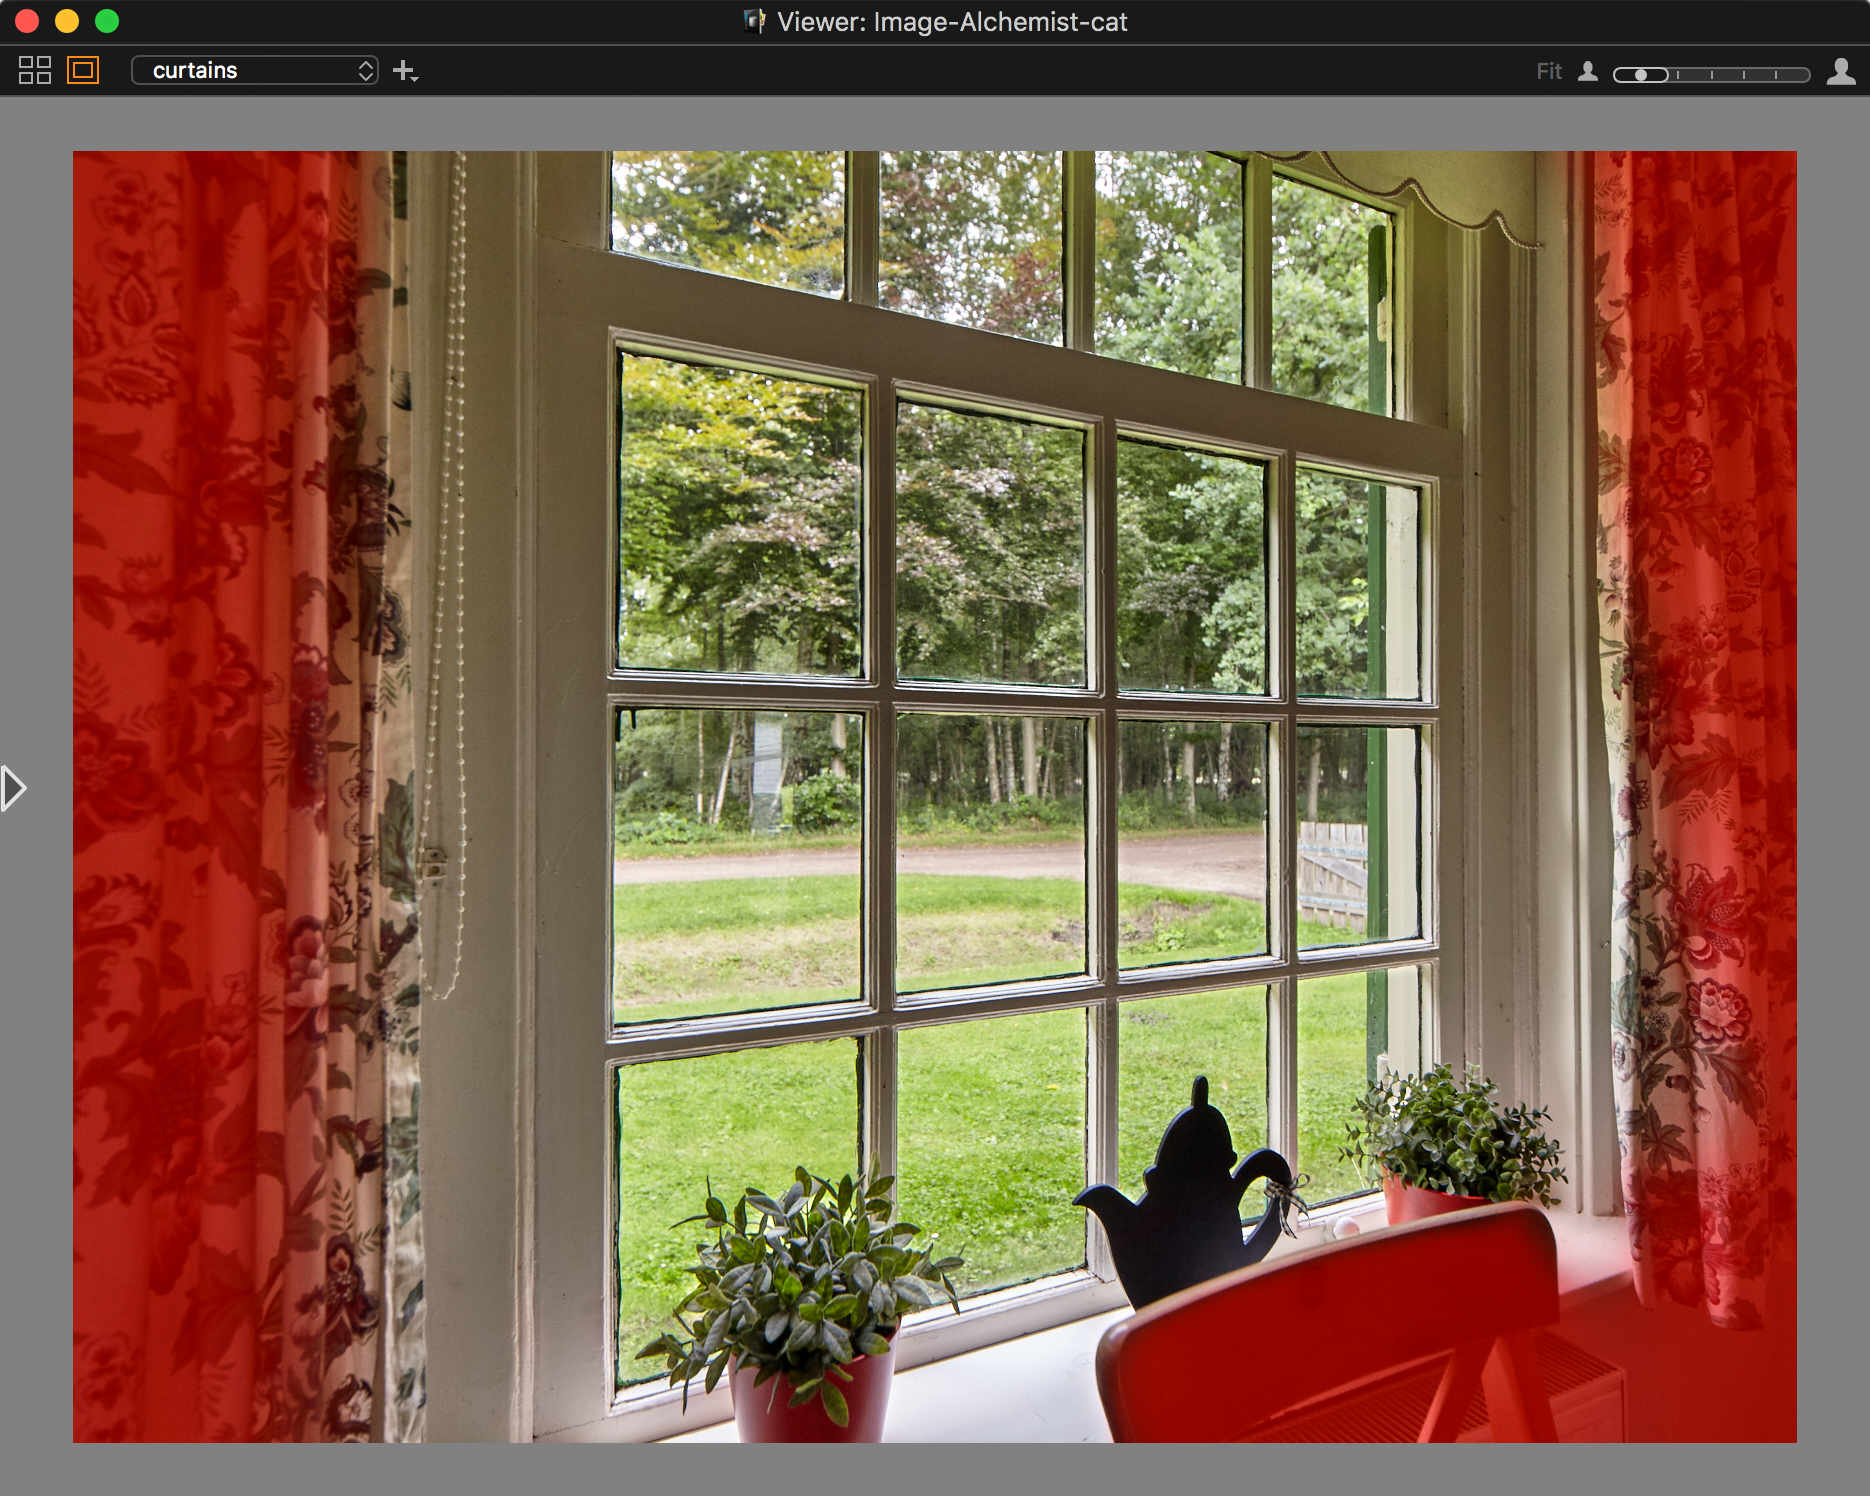 capture one layers explained, mask layer 2